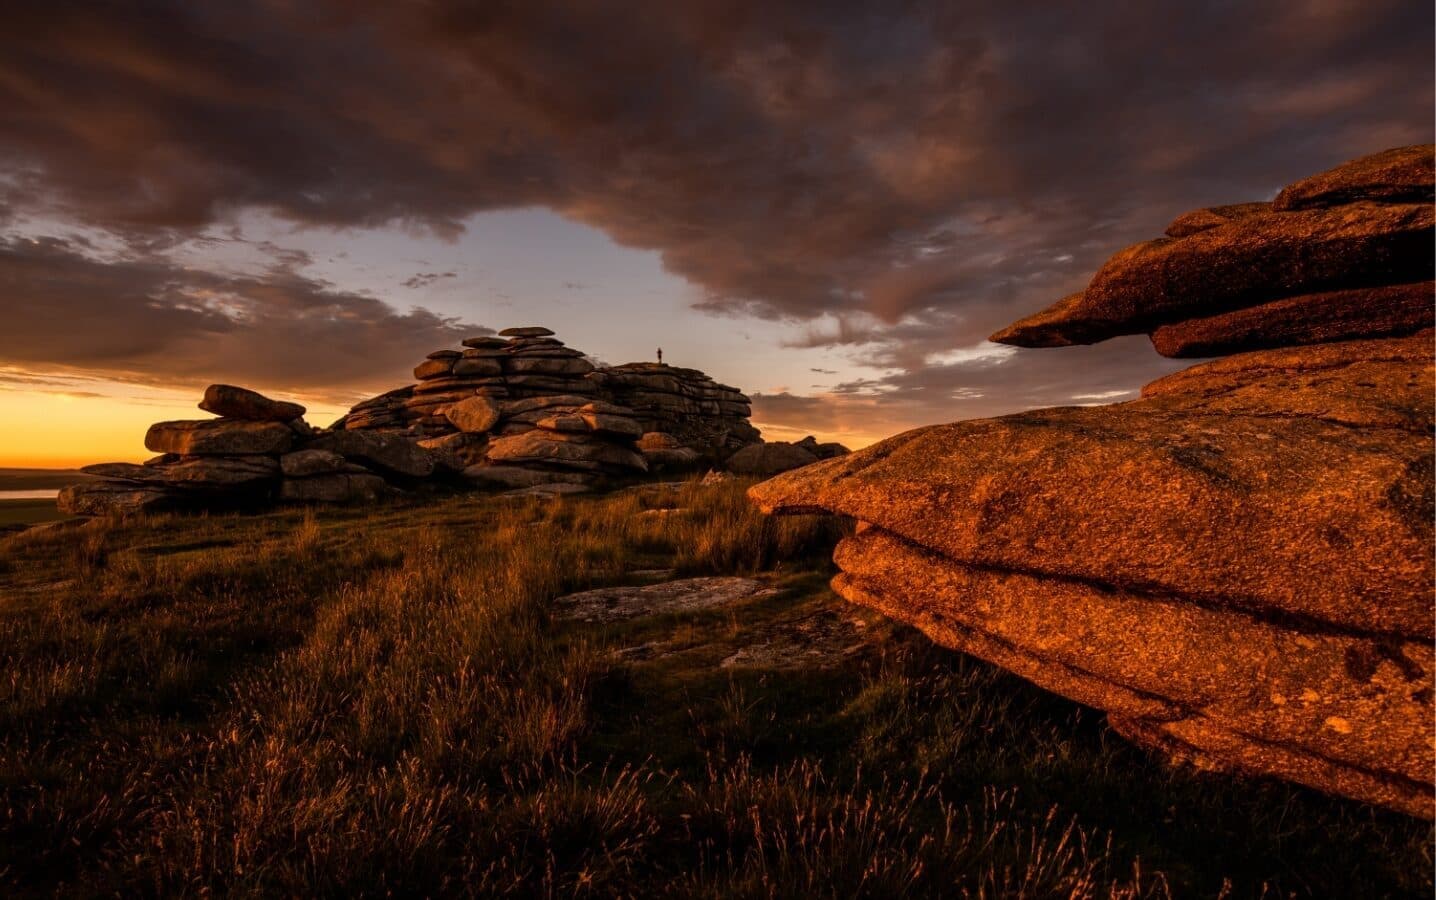 Cornwall NT - Sunset light at Rough Tor (c) Myles Pinkney